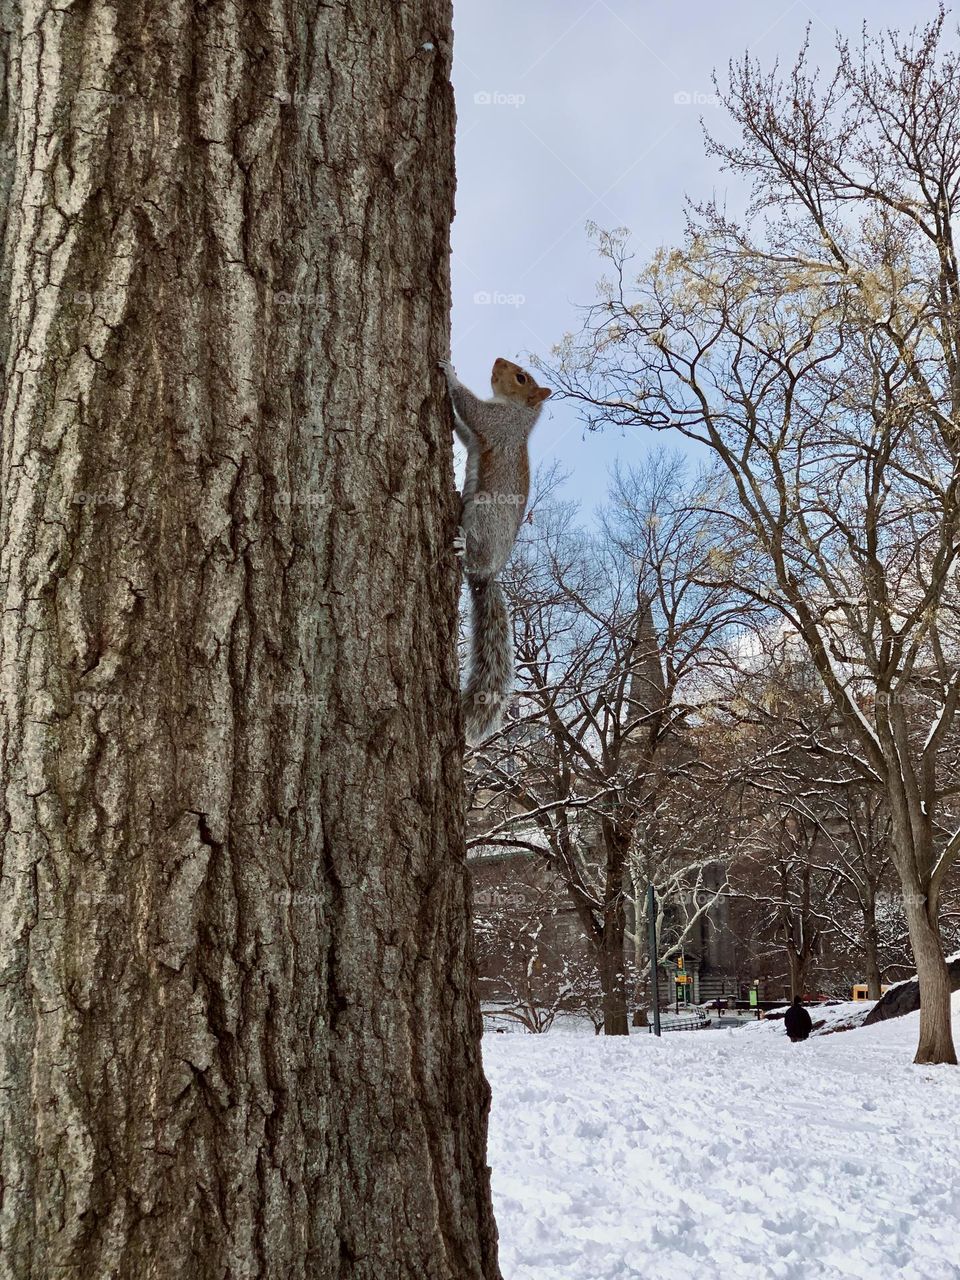 Cute squirrel climbing on a big tree trunk during winter season at Central Park. 